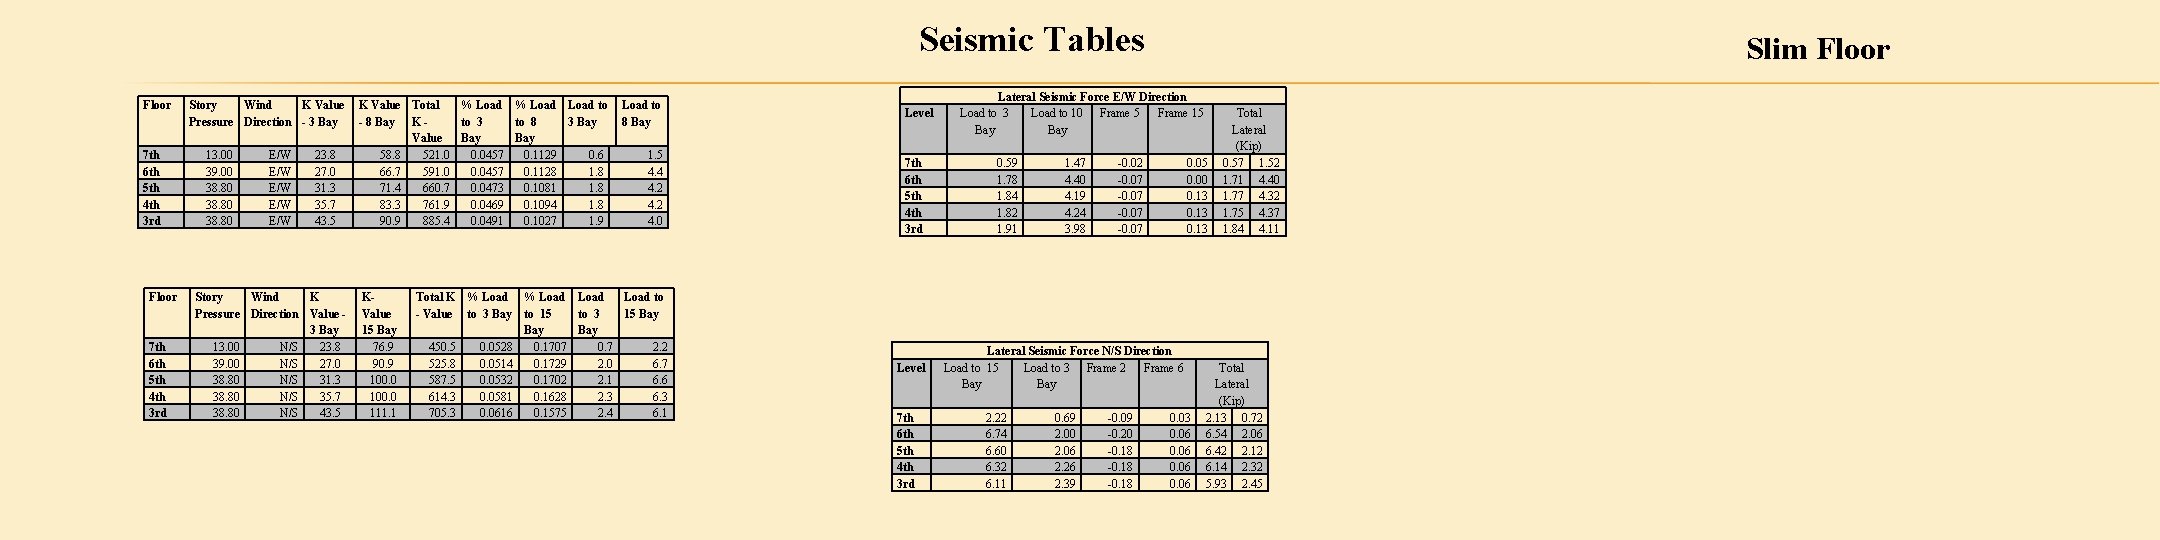 Seismic Tables Floor 7 th 6 th 5 th 4 th 3 rd Story